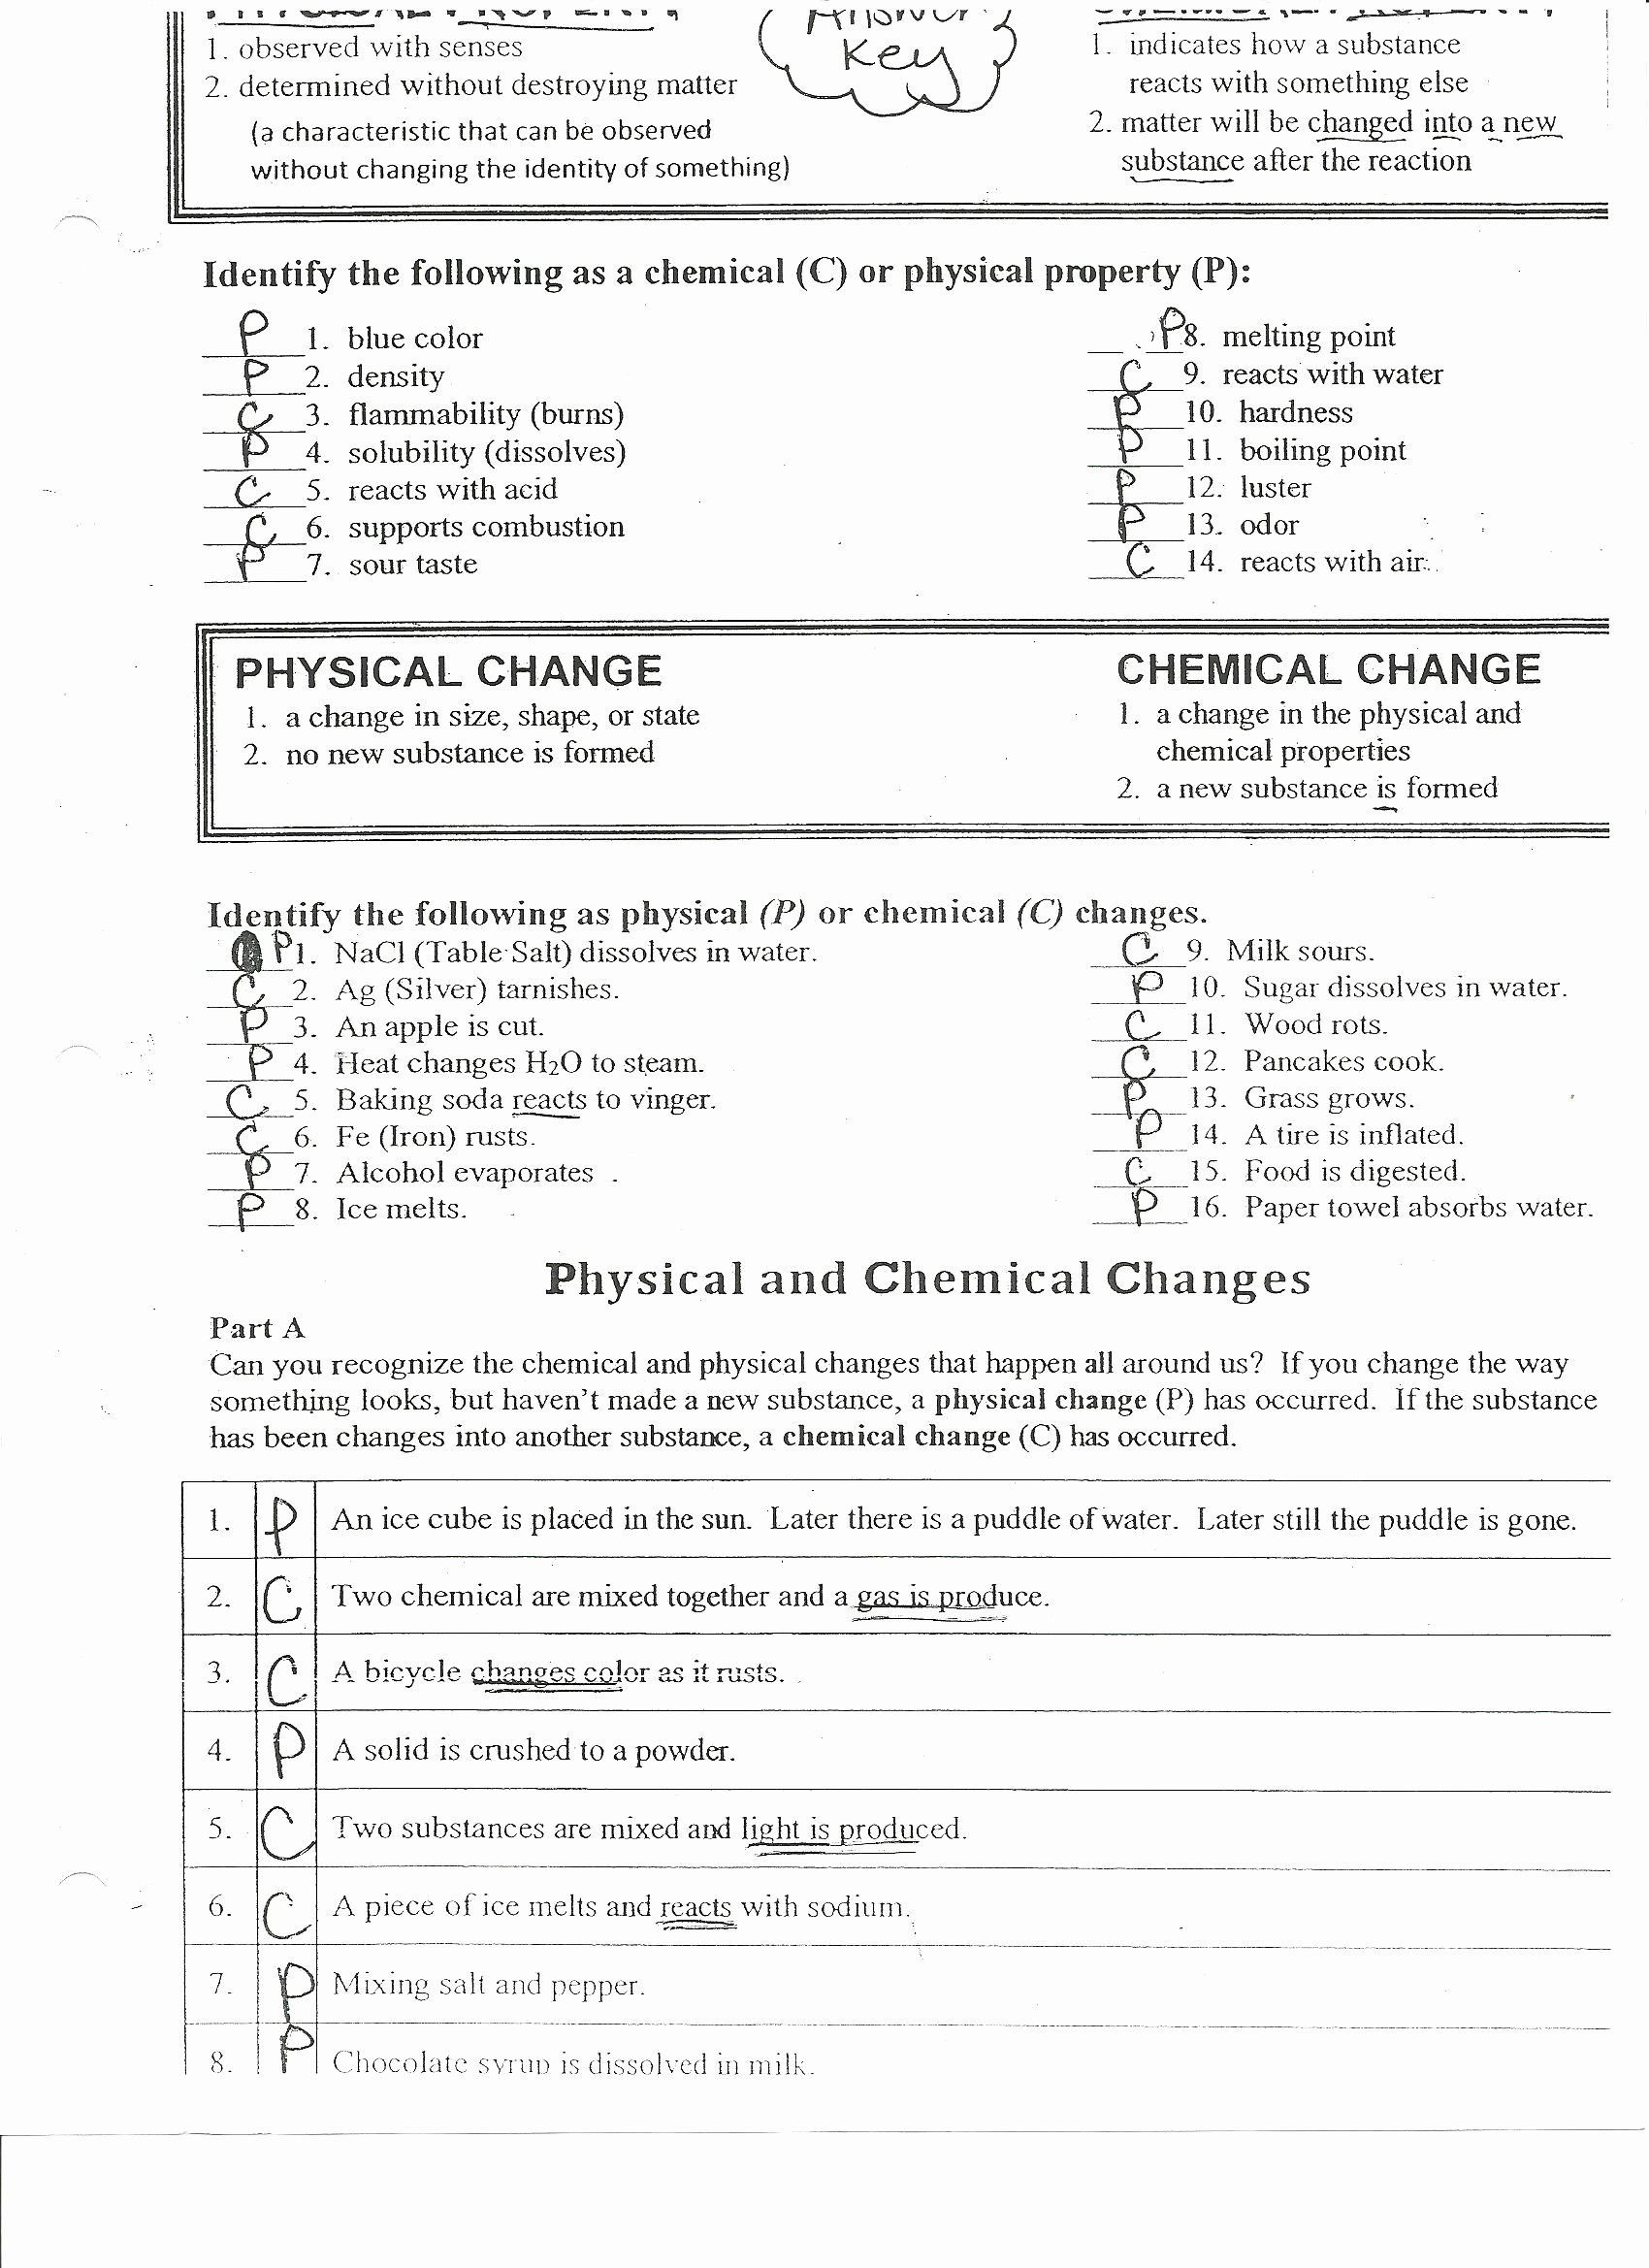 Physical Vs Chemical Changes Worksheet 50 Physical and Chemical Change Worksheet In 2020